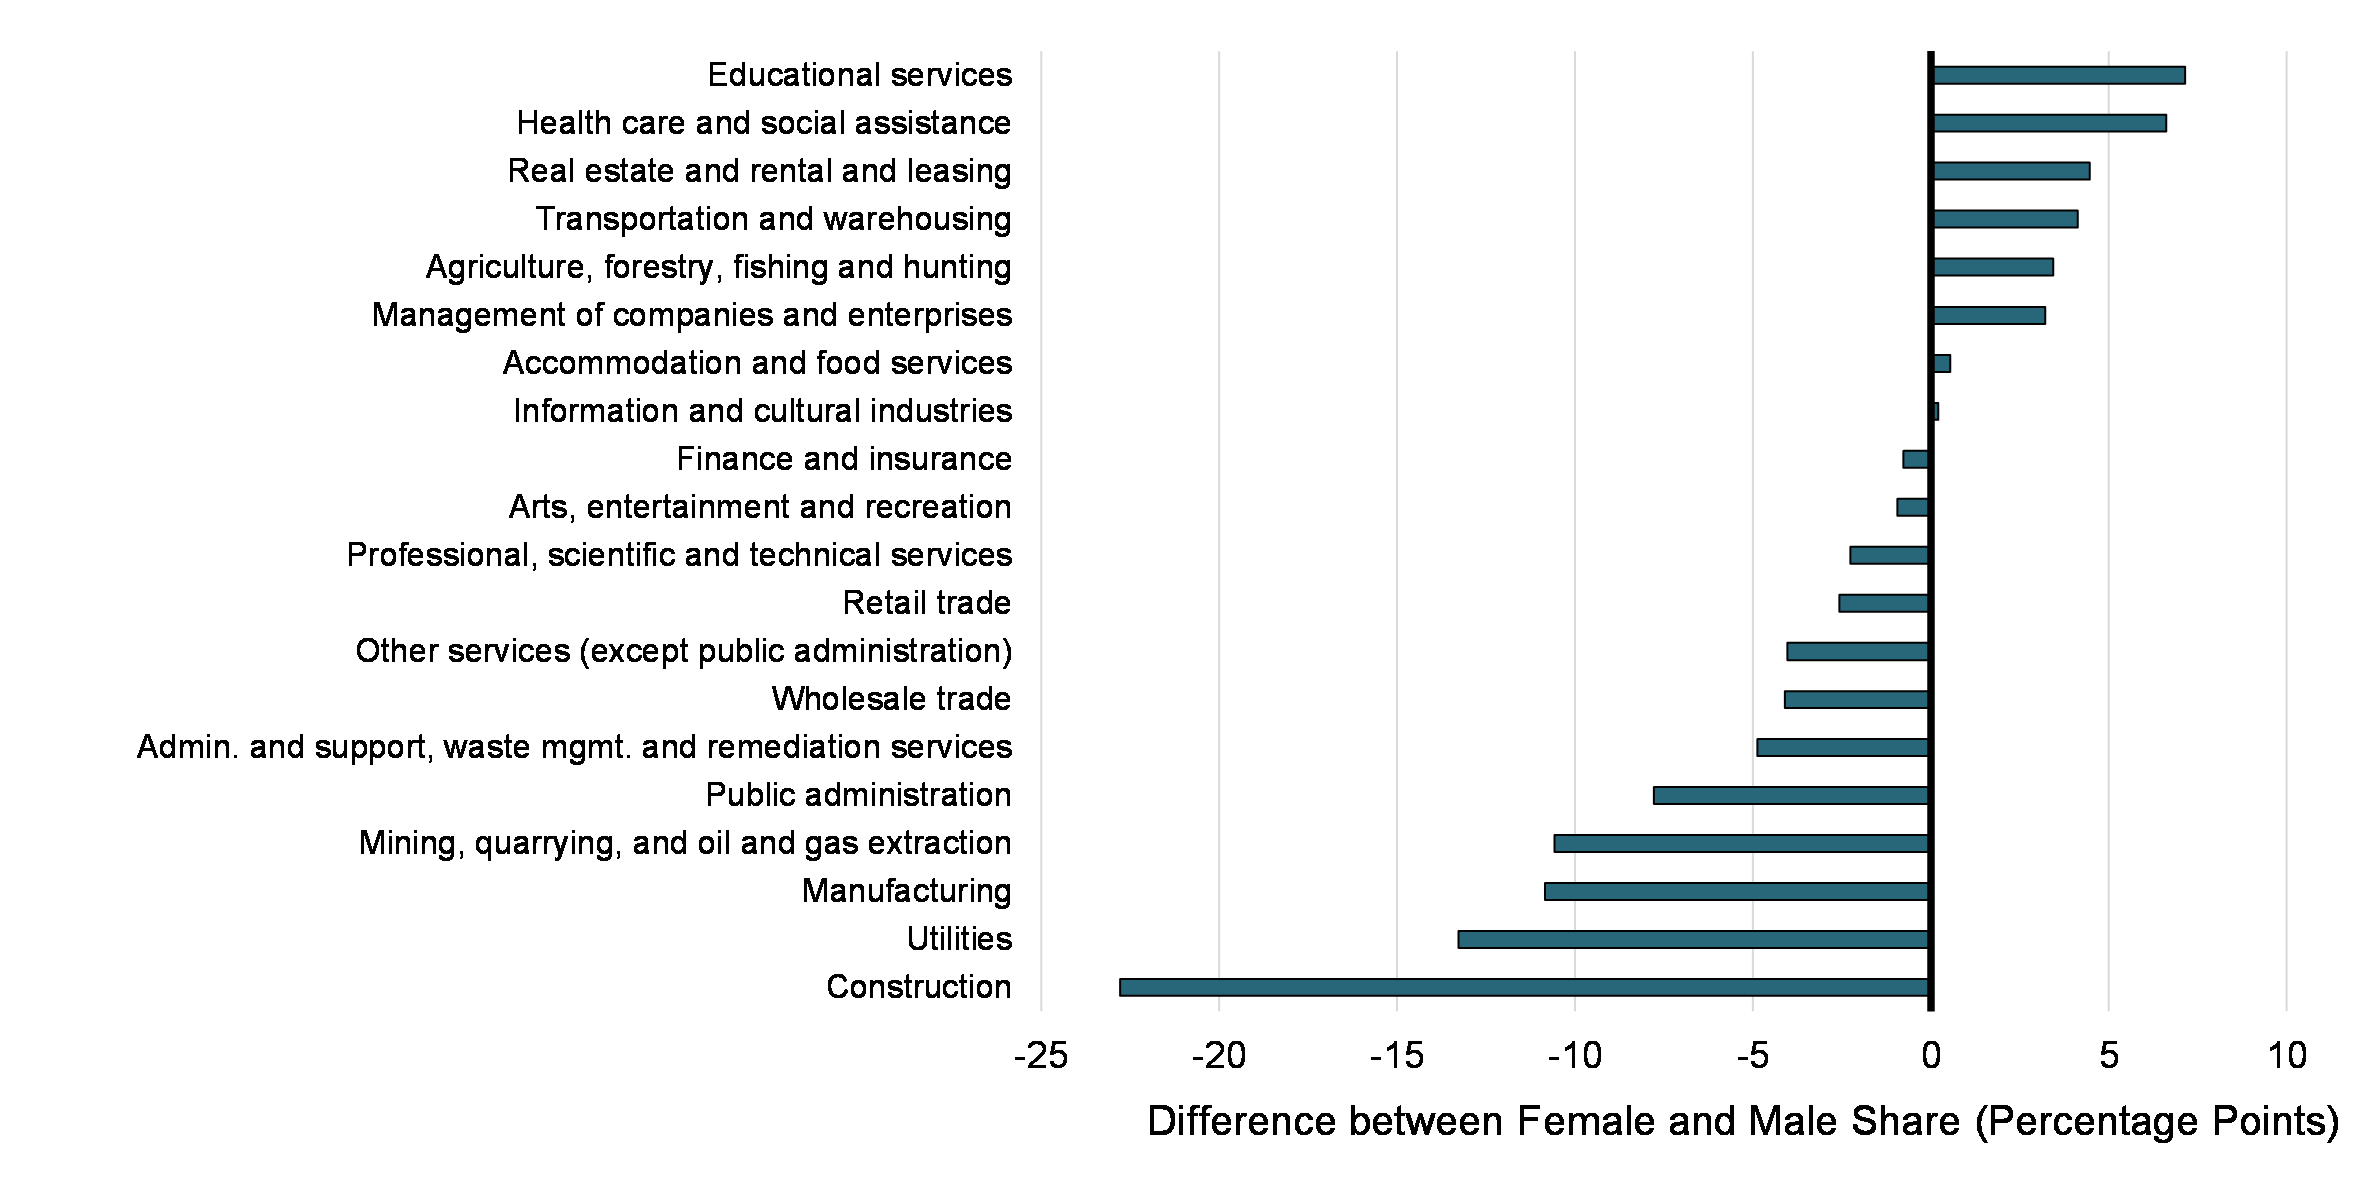 Chart 9: Difference between the Female and Male Shares of UPD Claimants, 
by Industry (2019)
